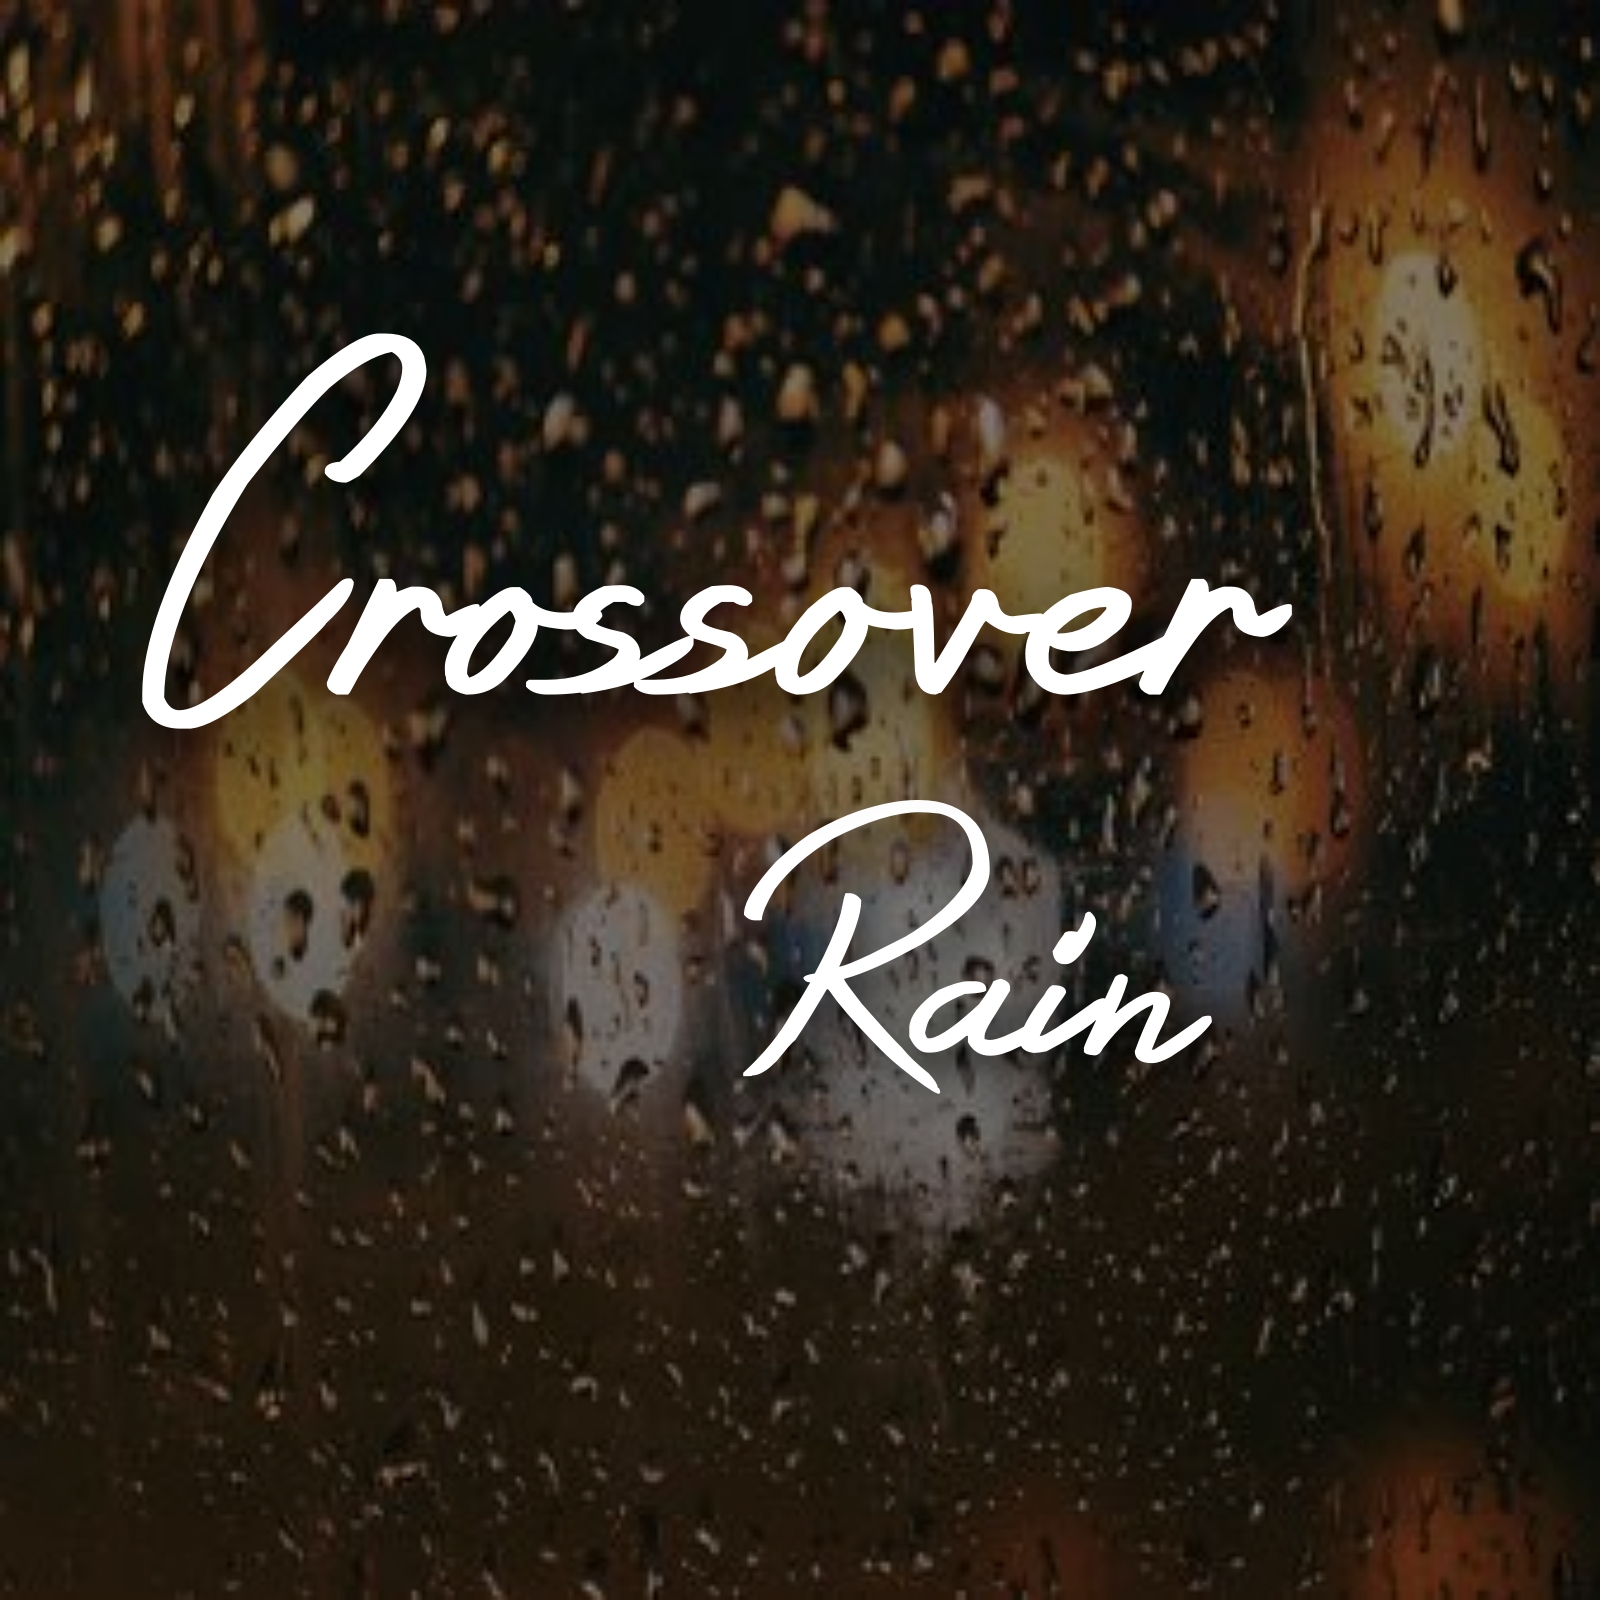 Art for Rain by Crossover